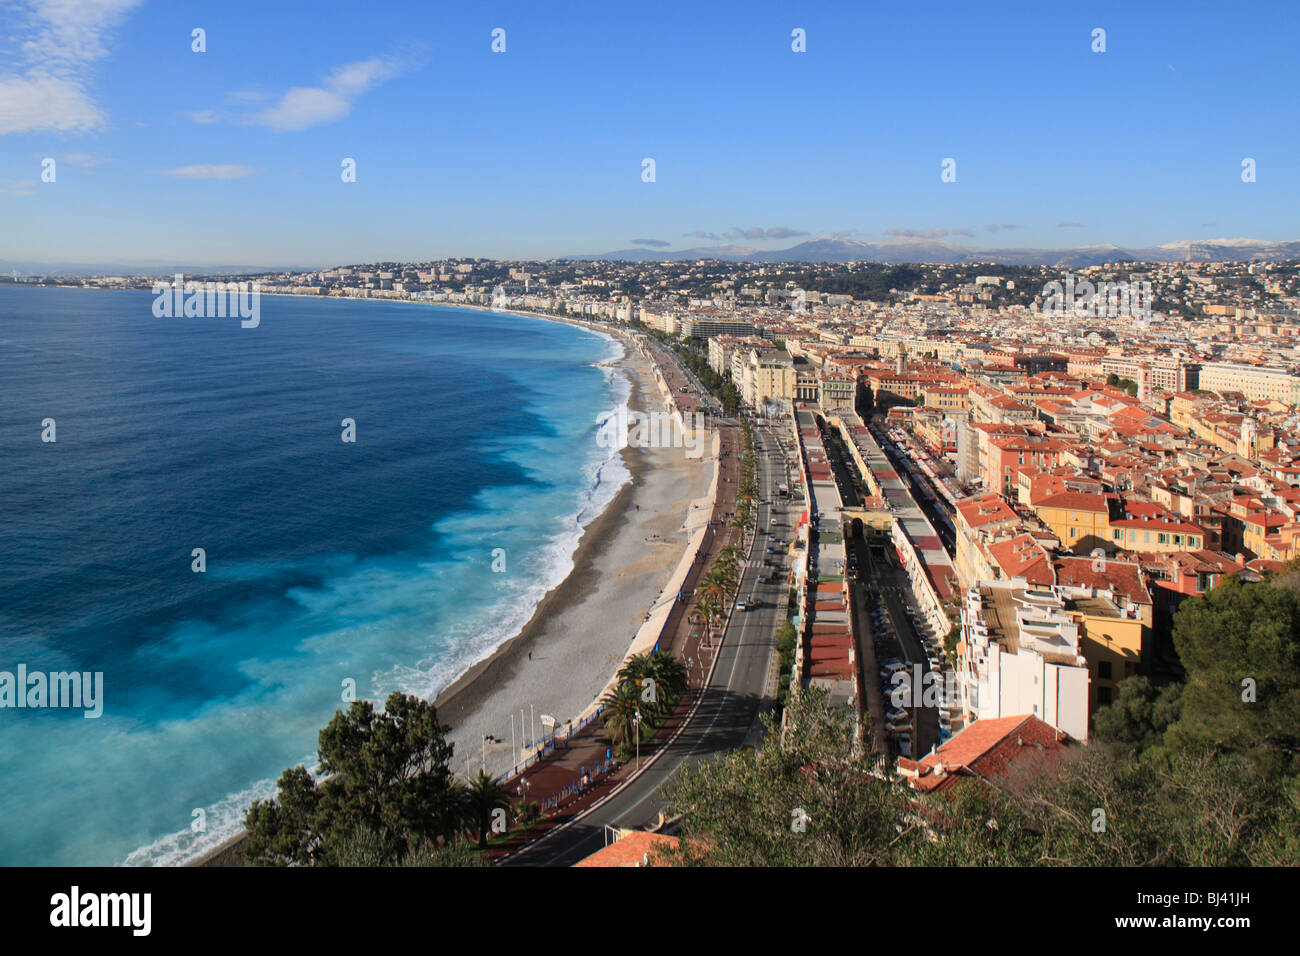 Baie des Anges bay, Beach at the Quai des Etats-Unis and Promenade des Anglais, seen from the castle hill, Nice, Alpes Maritime Stock Photo